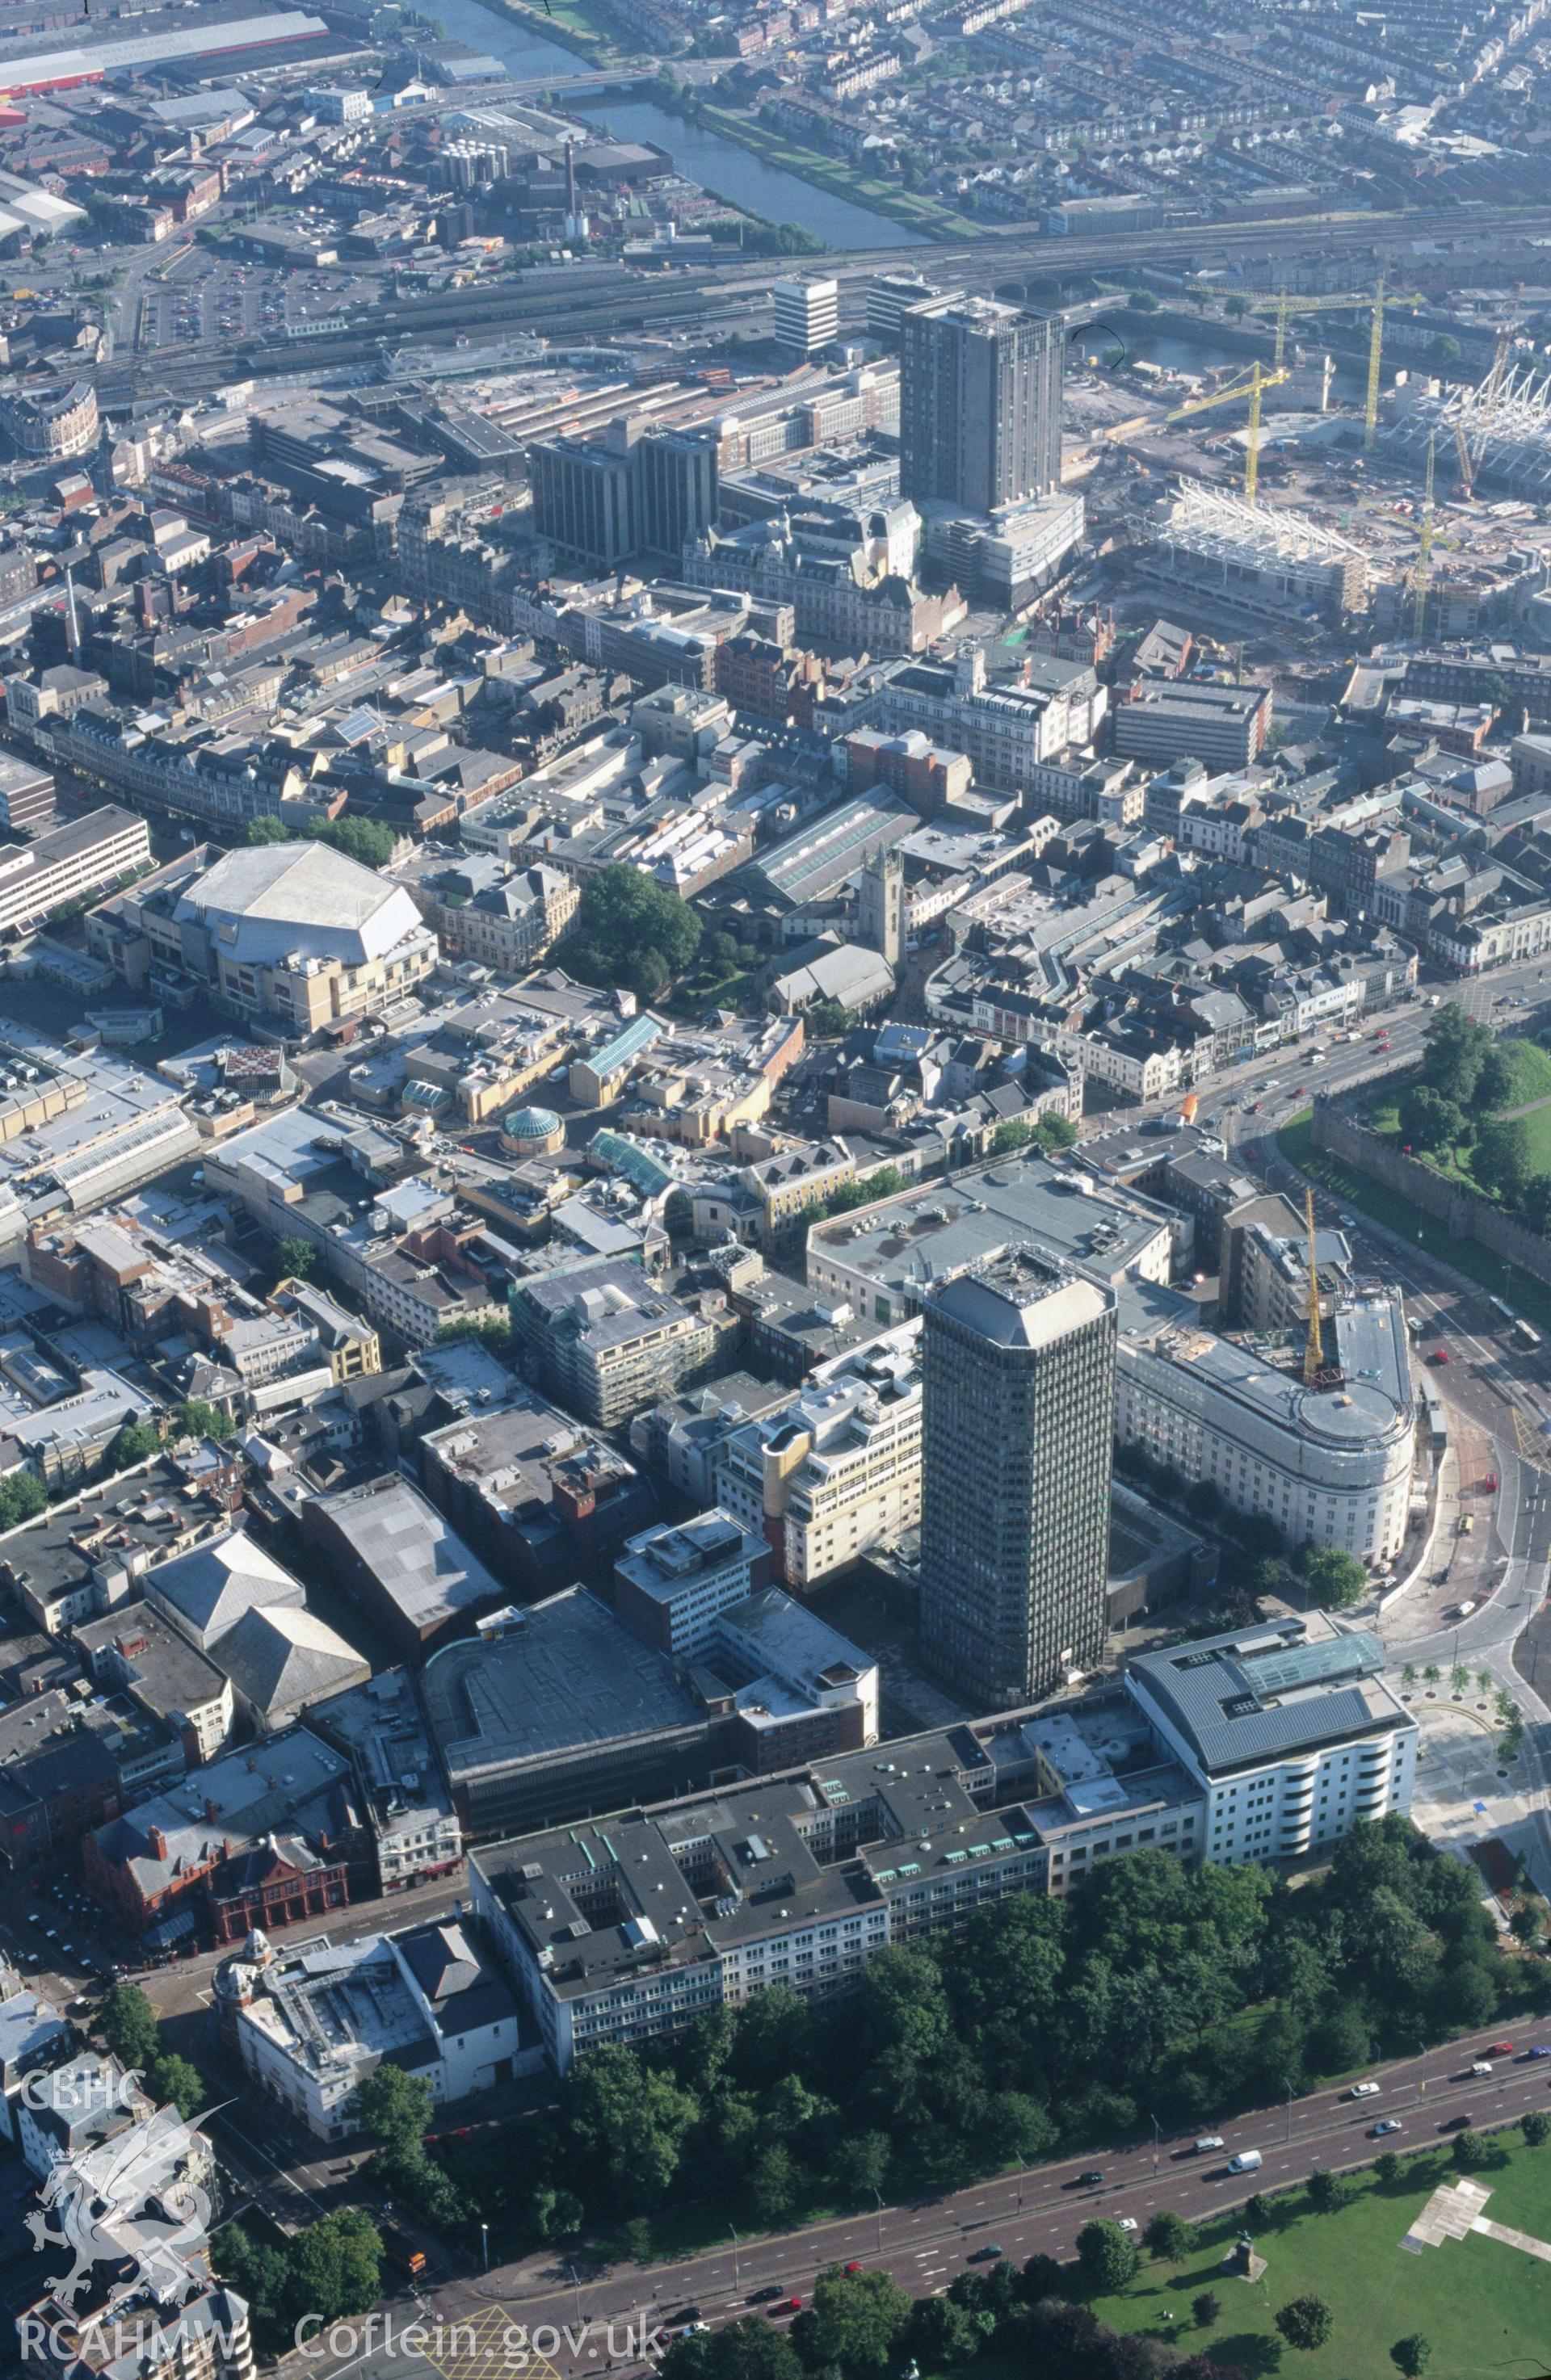 Slide of RCAHMW colour oblique aerial photograph of Cardiff, taken by T.G. Driver, 5/8/1998.